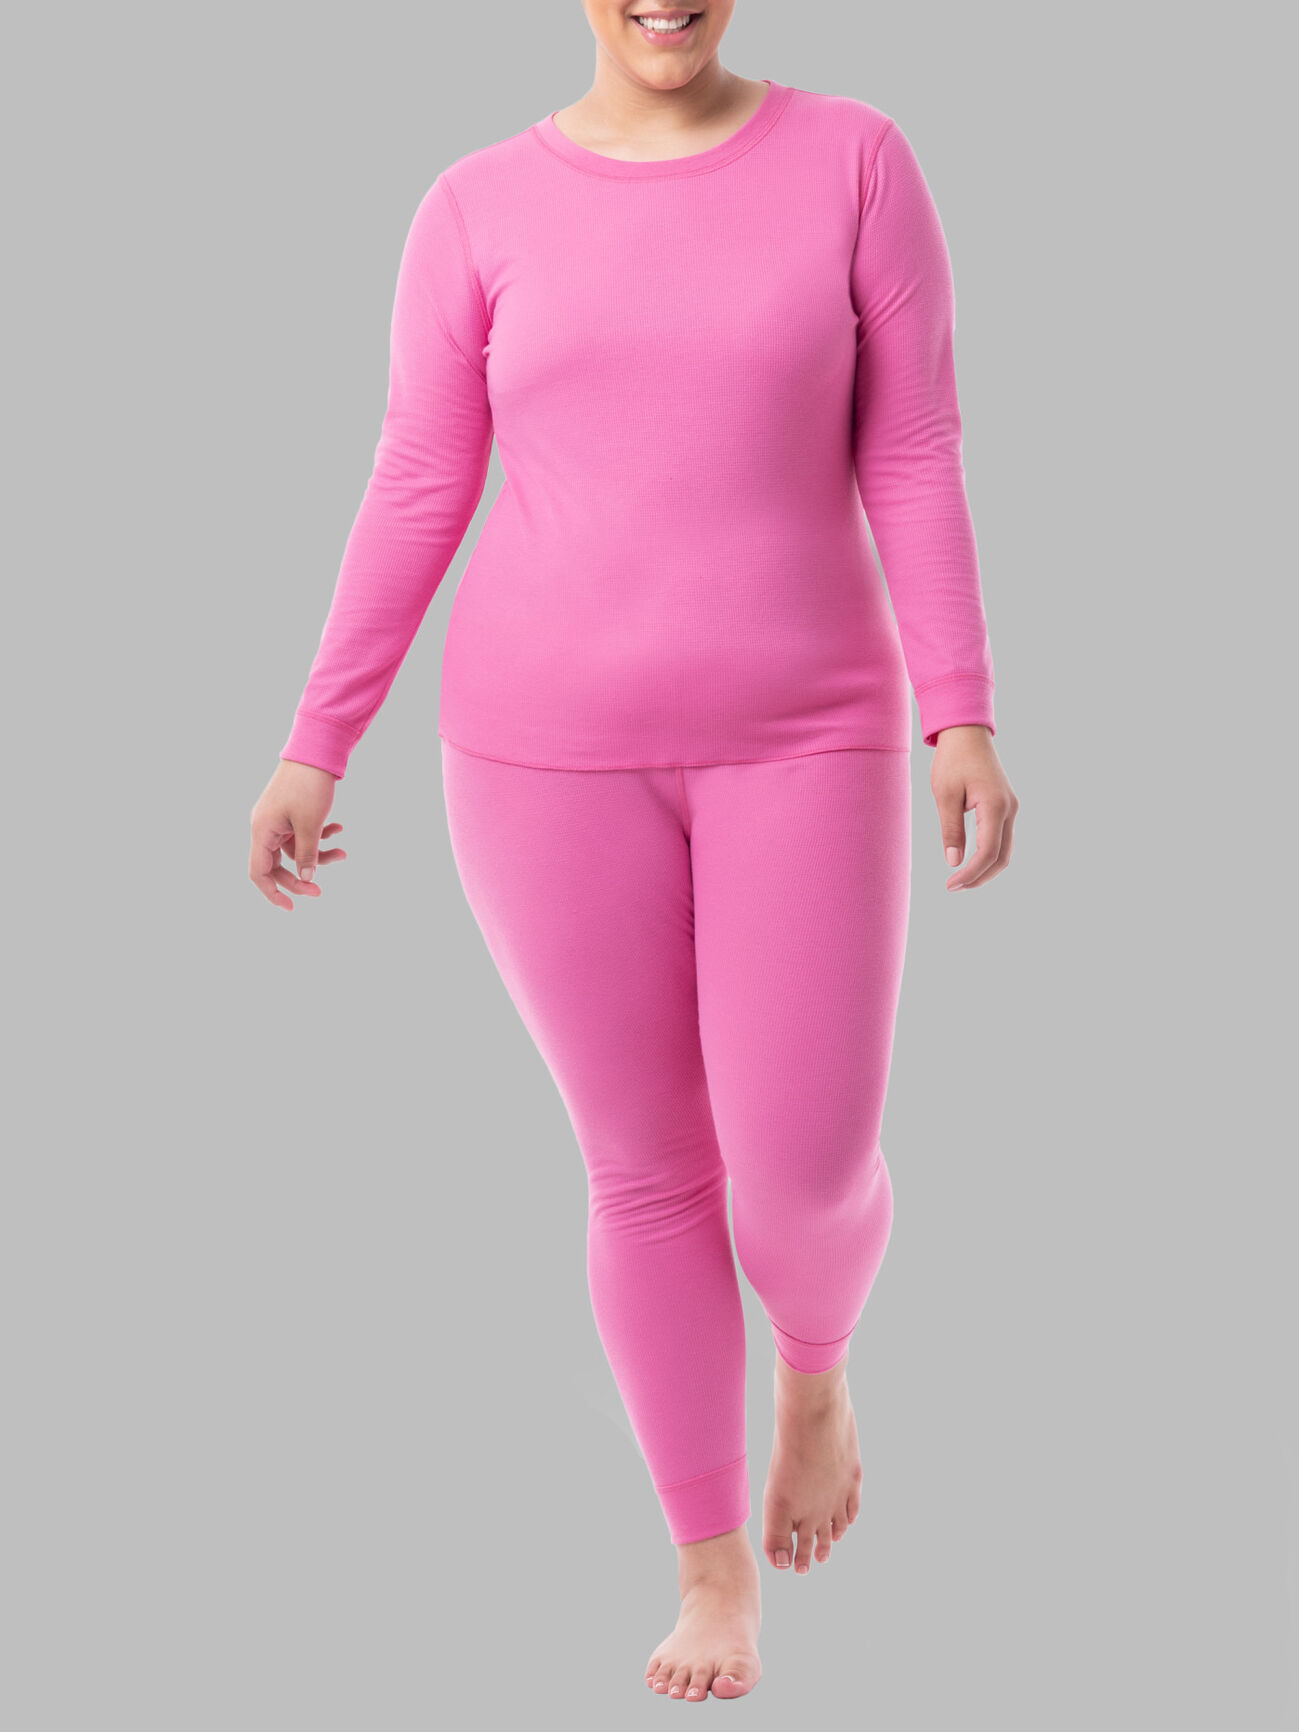 20% off Bras and Leggings Pink Running Long Sleeve Shirts.